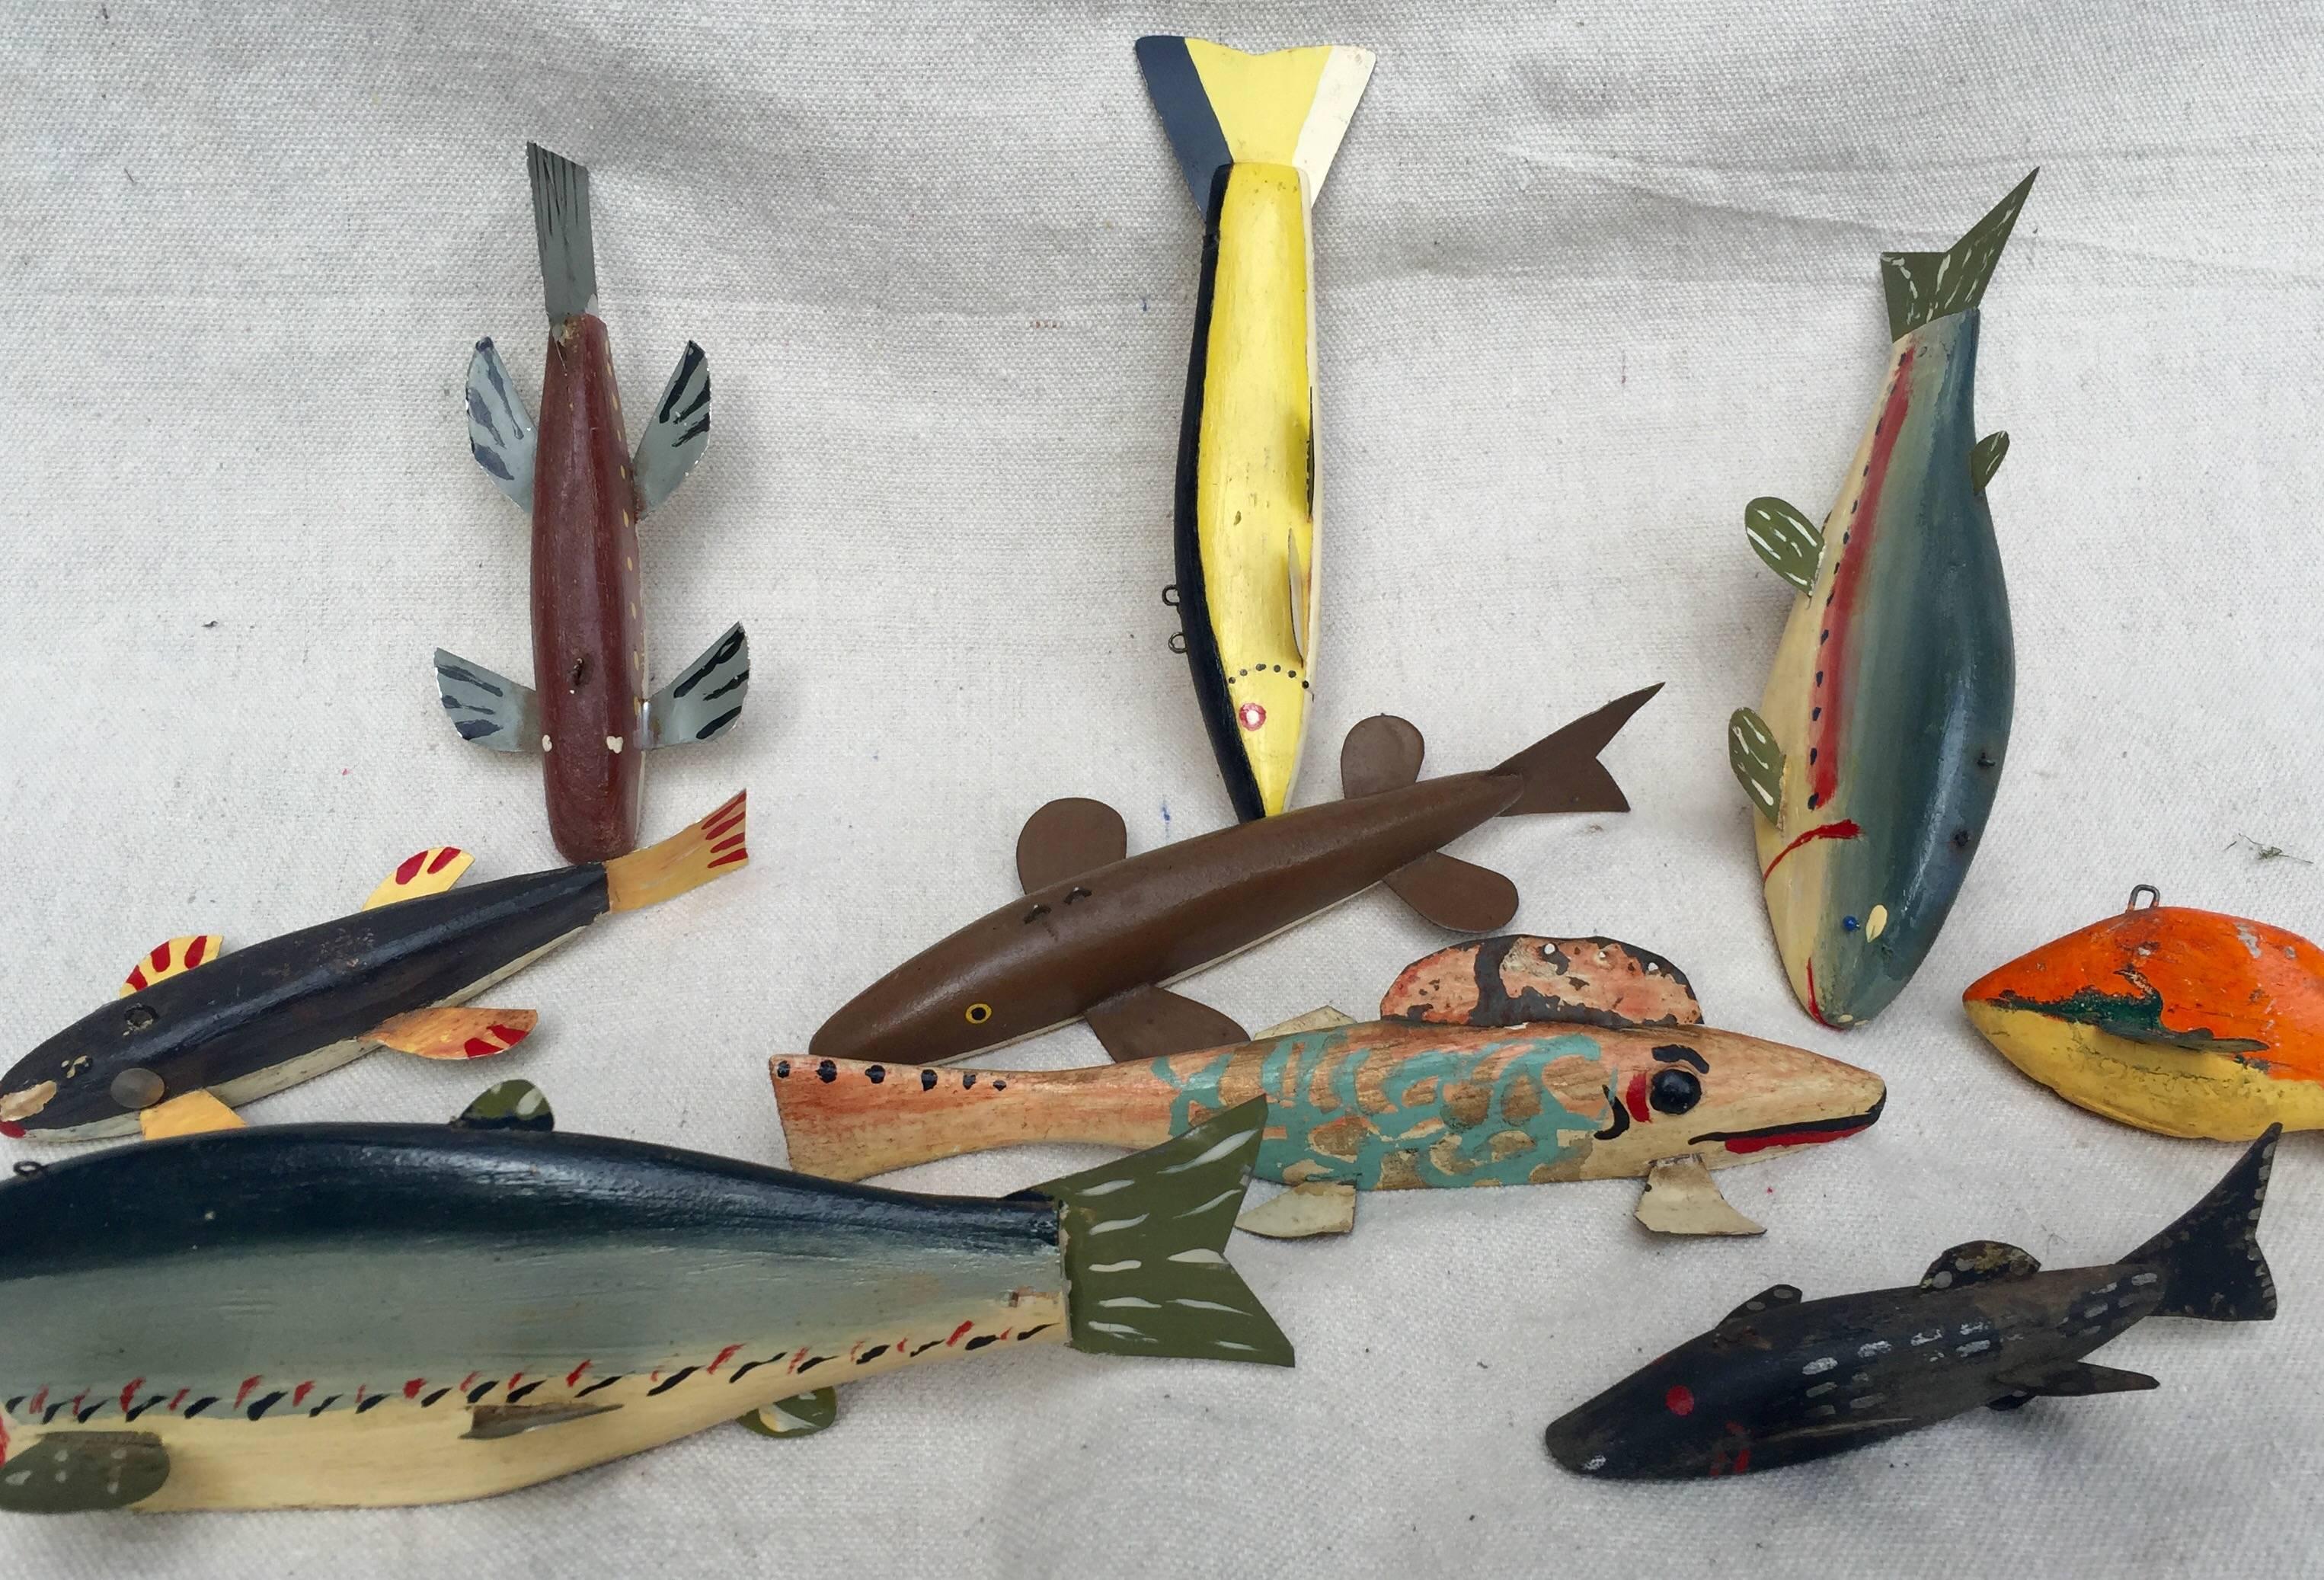 Collection of nine authentic, working ice fishing decoys from the Midwest. Whimsical forms of painted wood with added metal elements. From 3.5